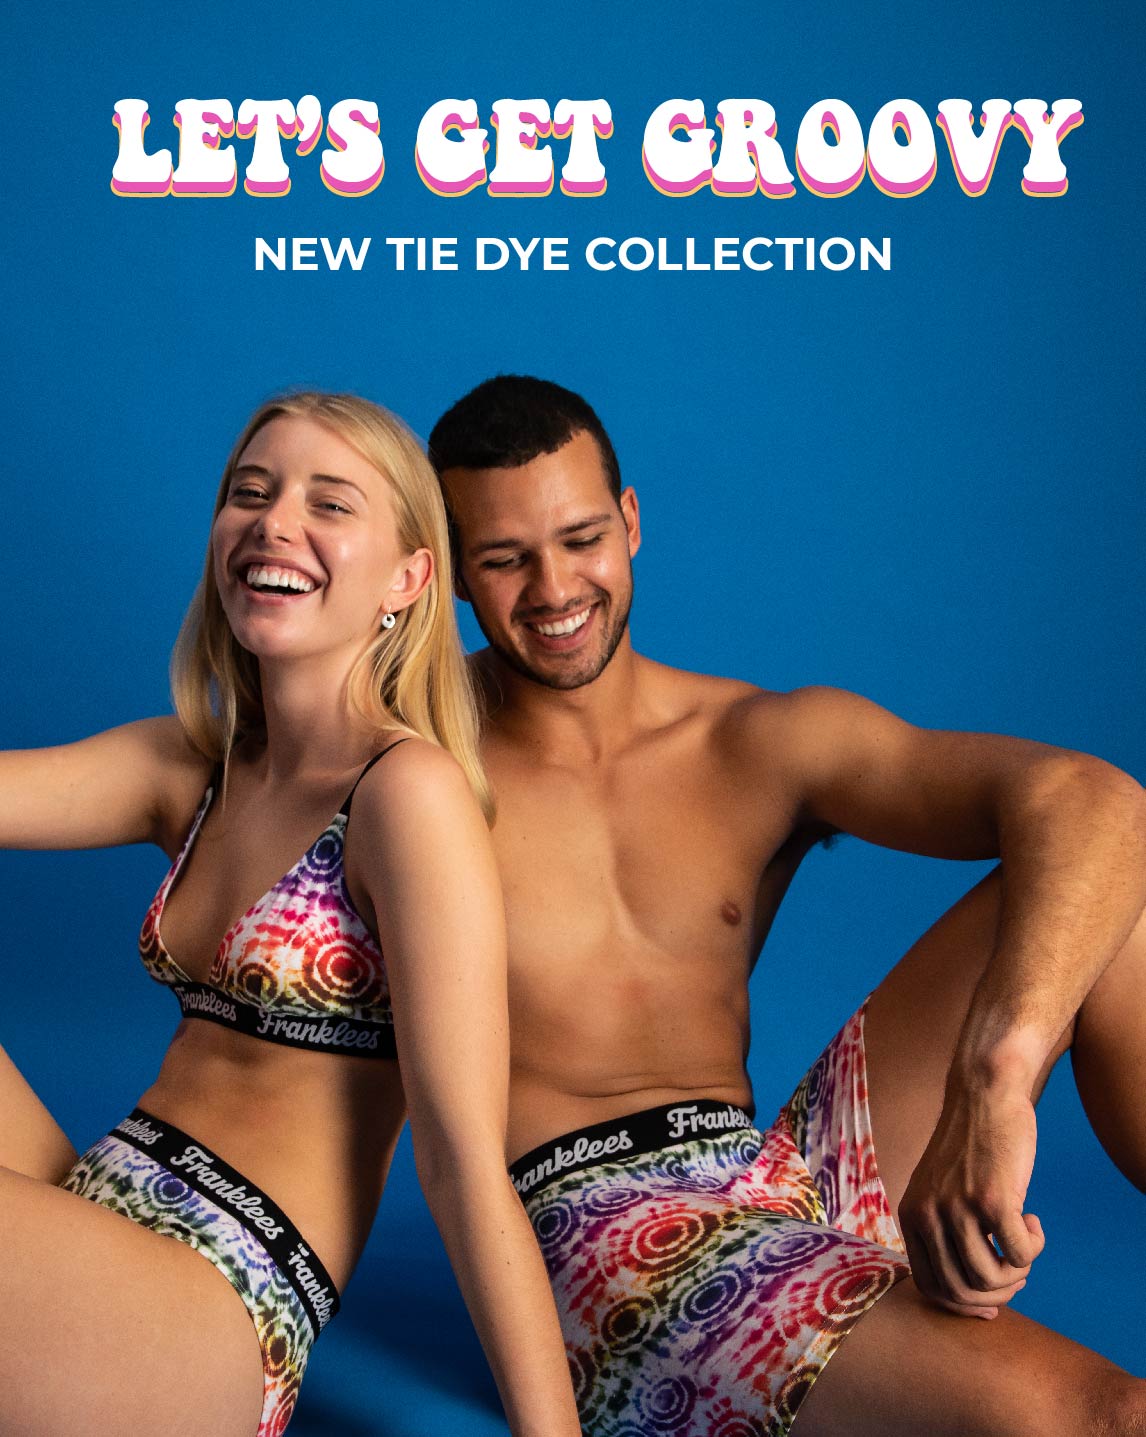 Franklees Underwear- Made to Match, Fun prints